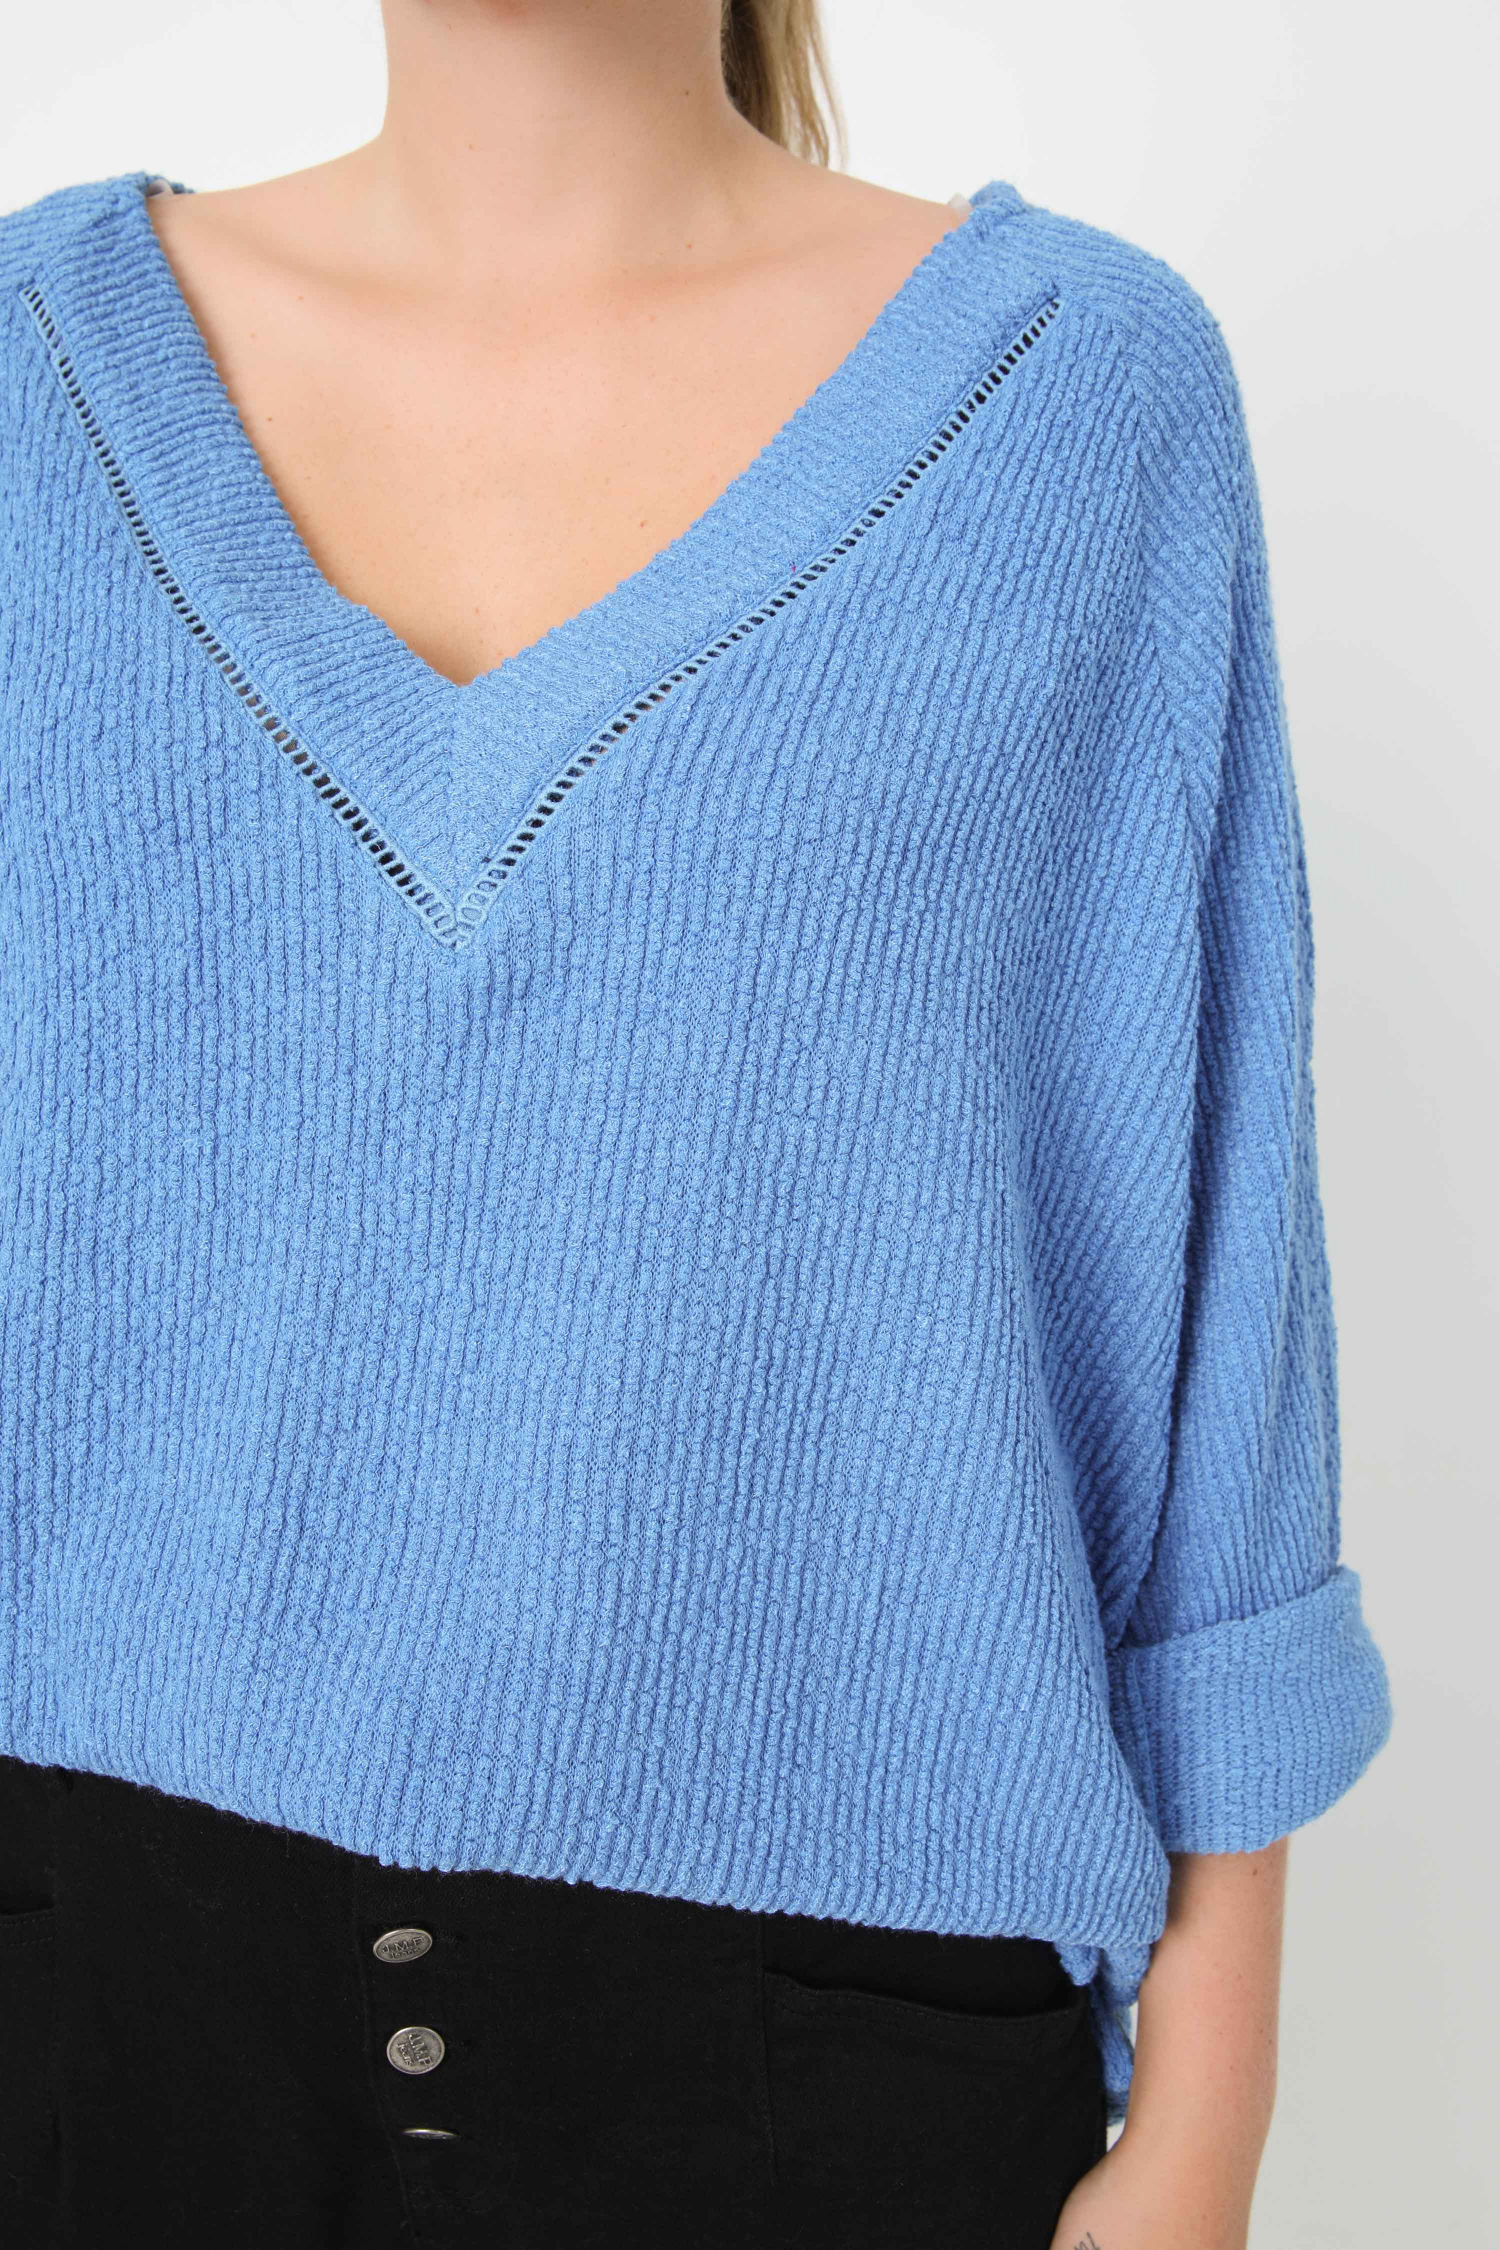 Chenille knit sweater with macramé